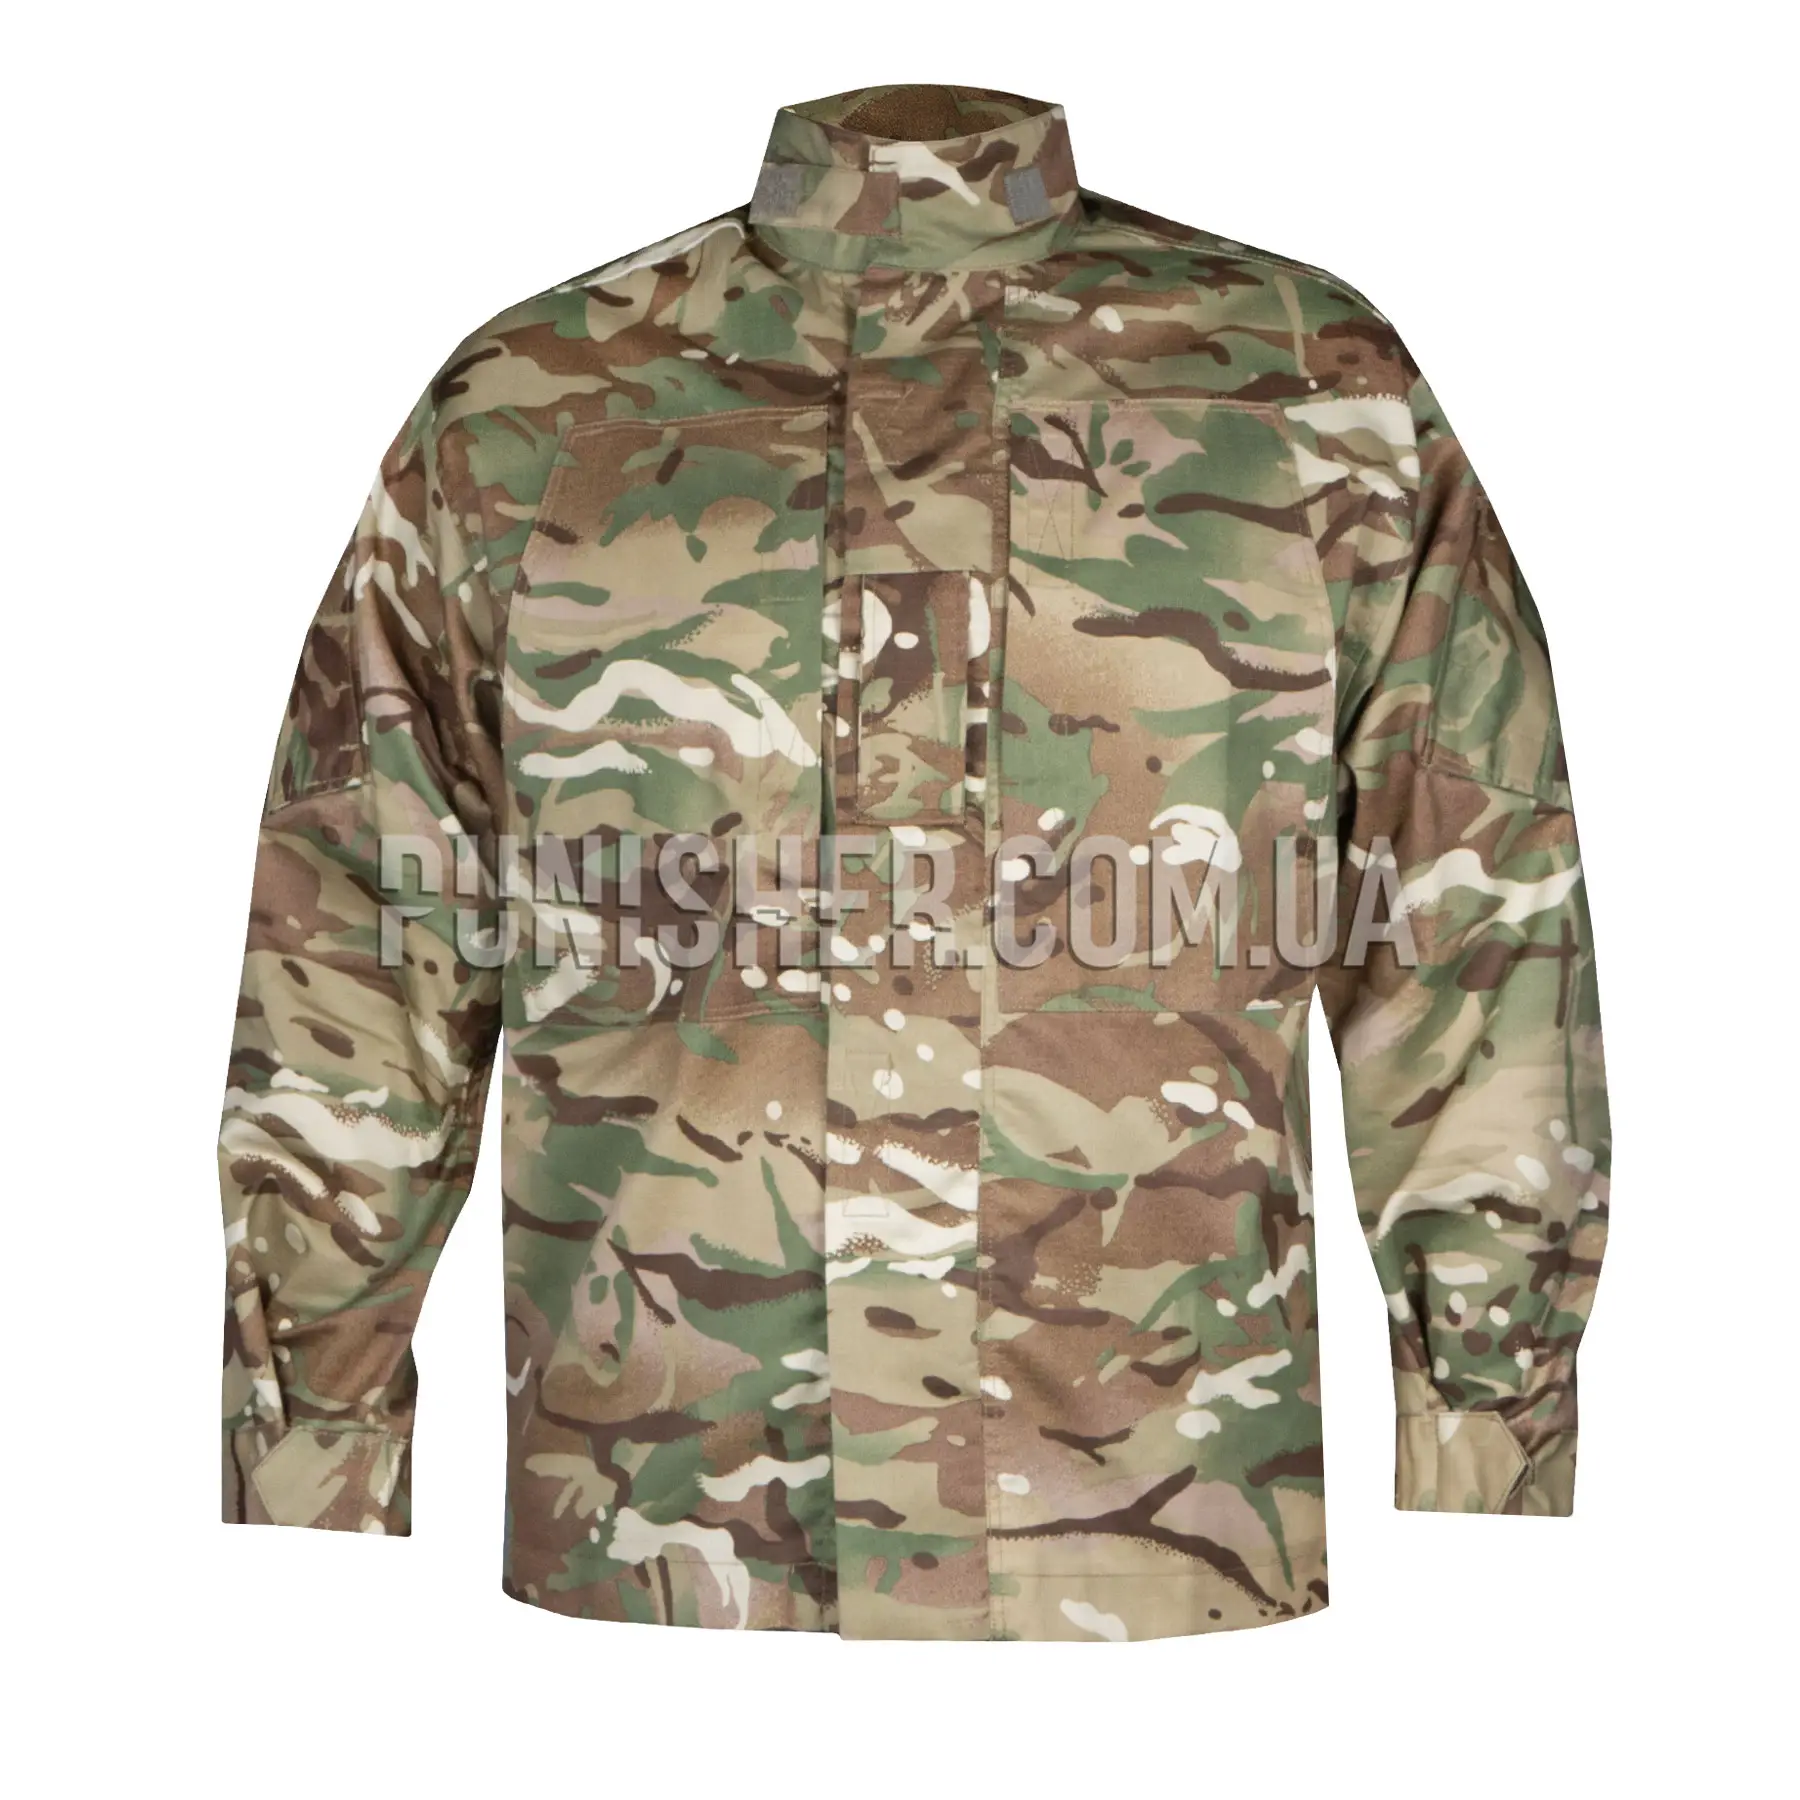 Military Uniform Tactical Camouflage Cotton Warm Uniforms Hunting Clothing